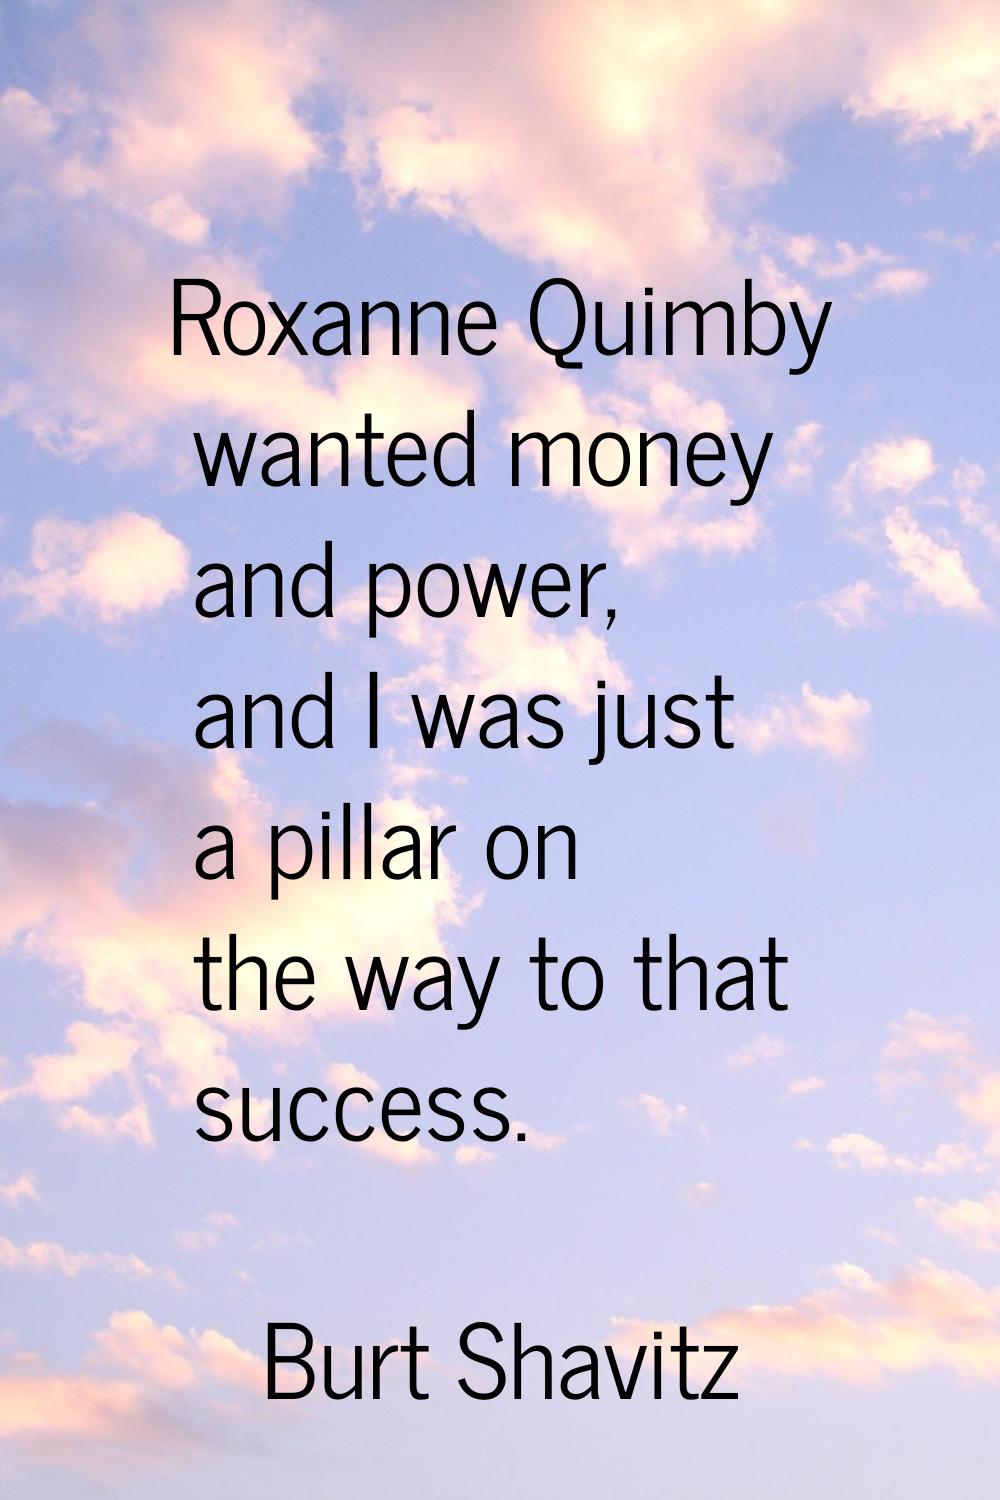 Roxanne Quimby wanted money and power, and I was just a pillar on the way to that success.